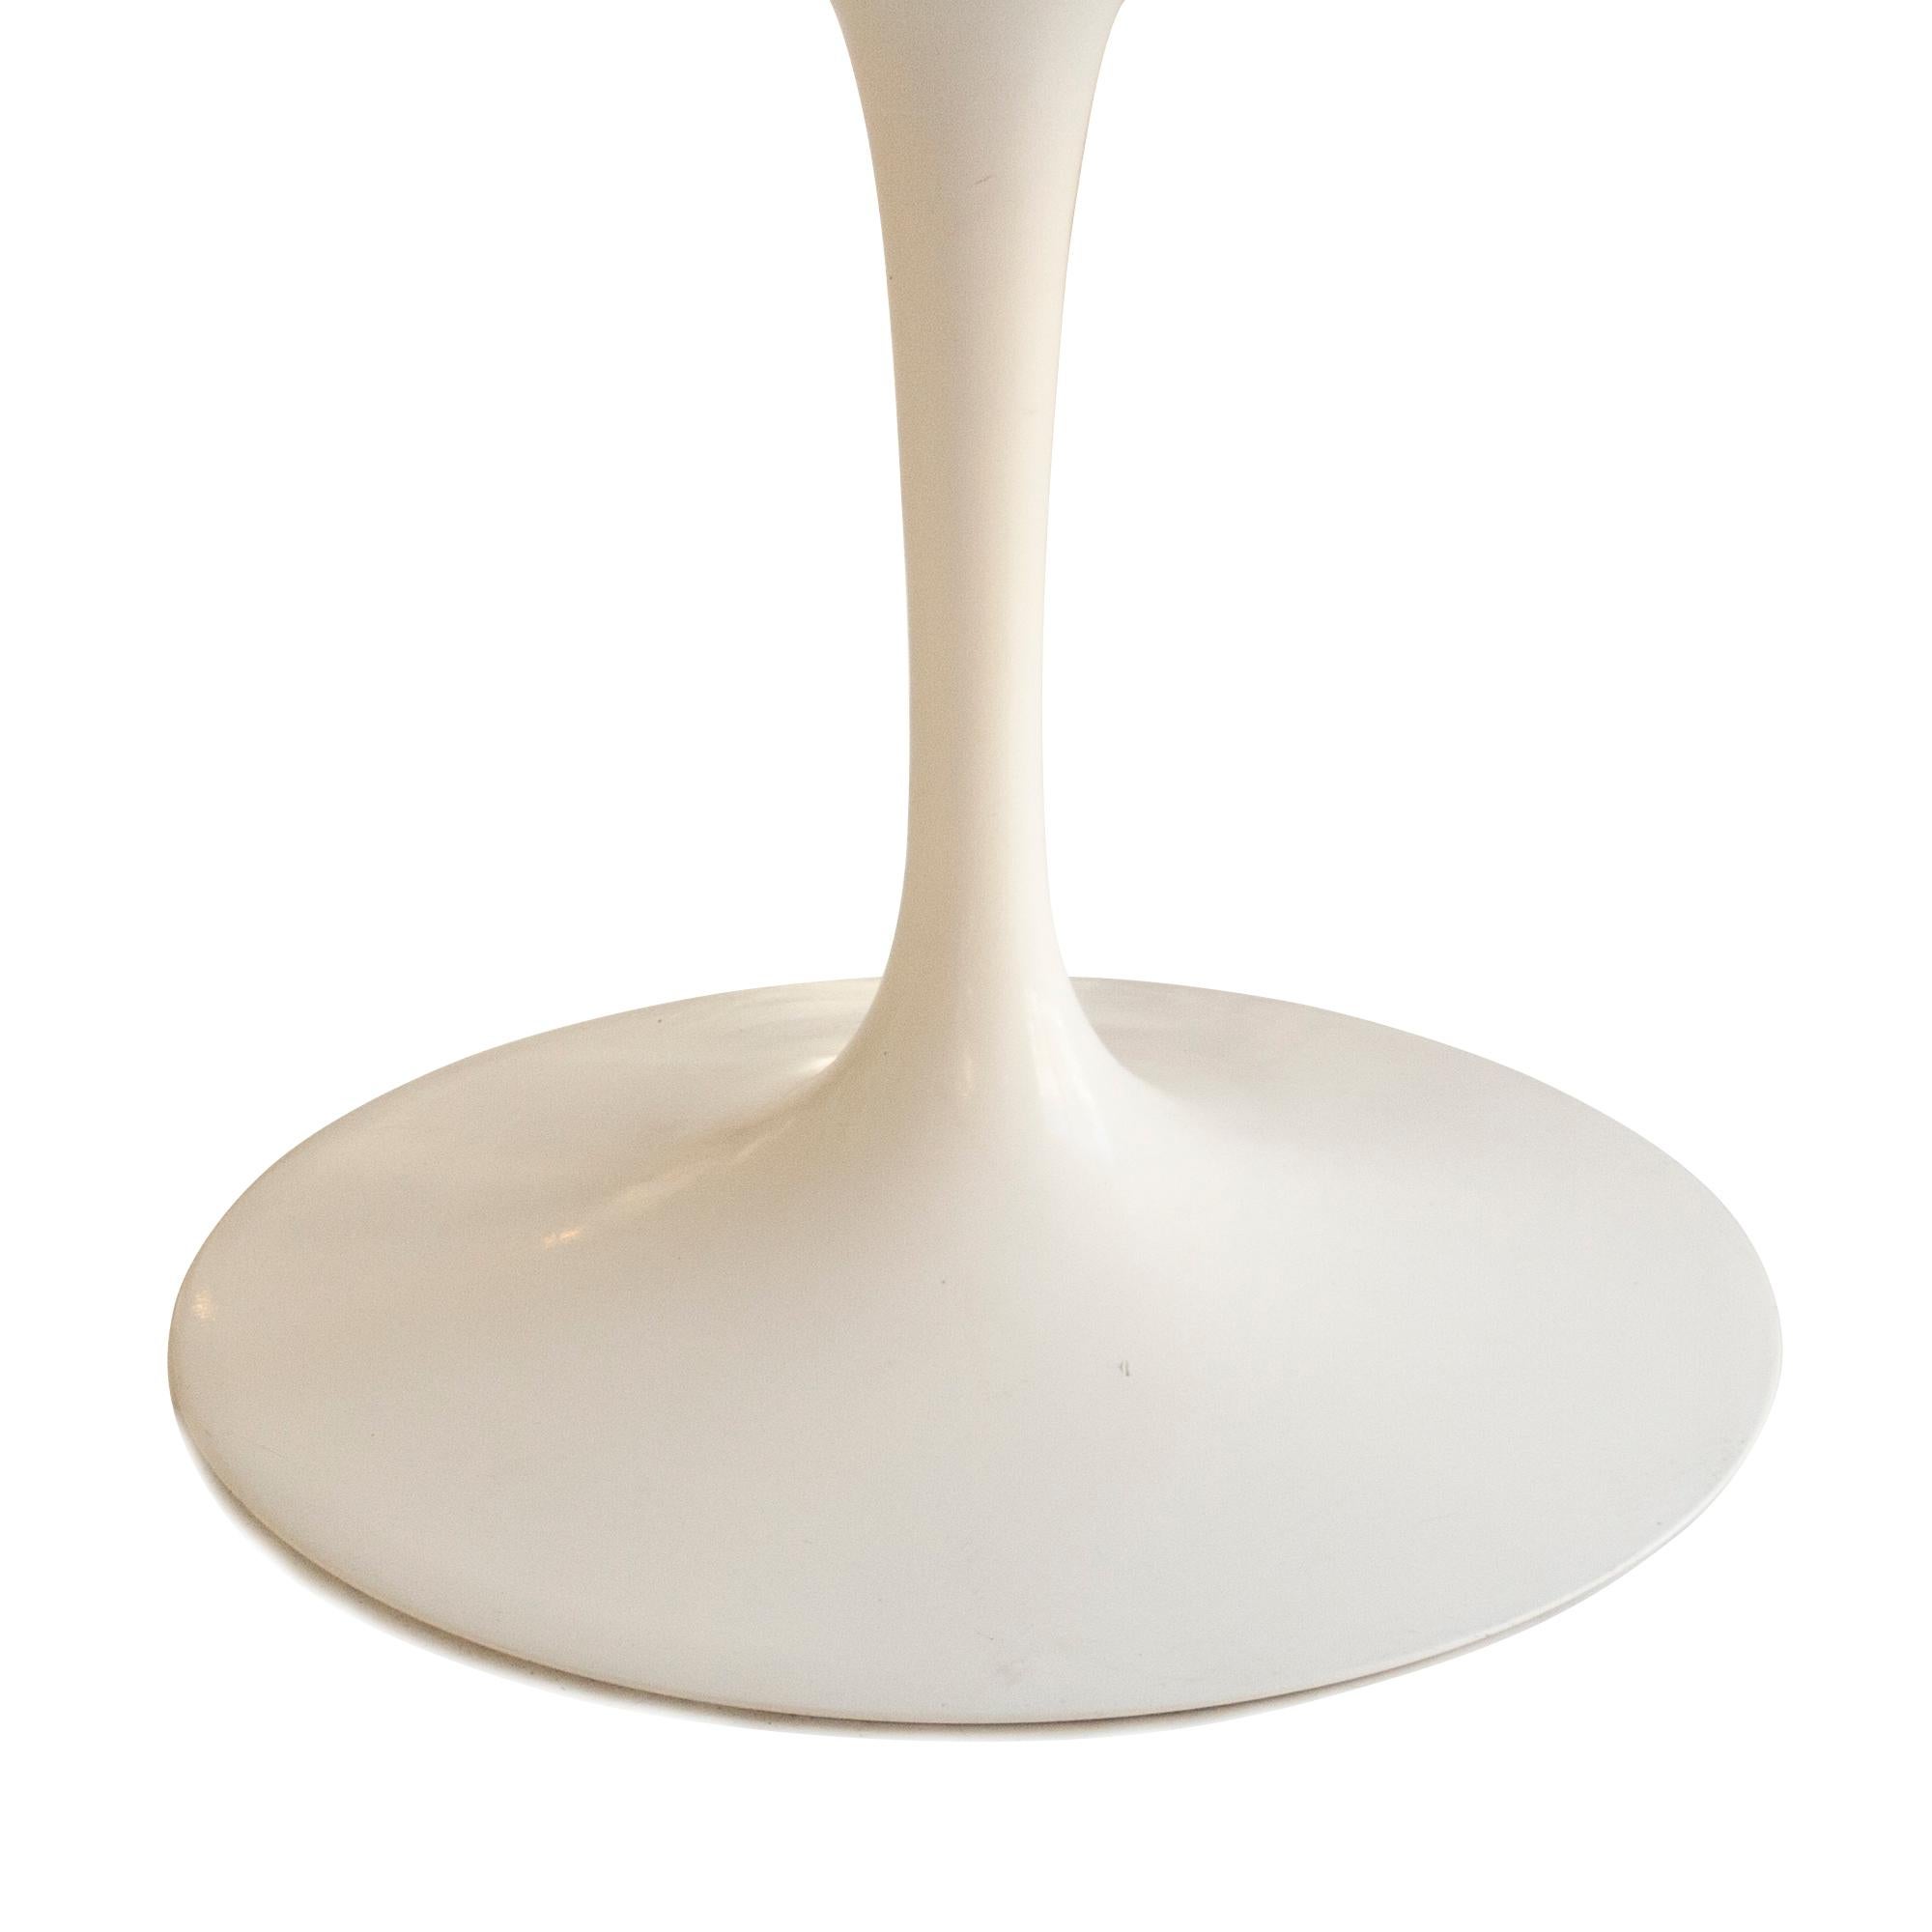 Lacquered Mid-Century Modern Tulip Style Carrara Marble Dining Table, Germany, 1970